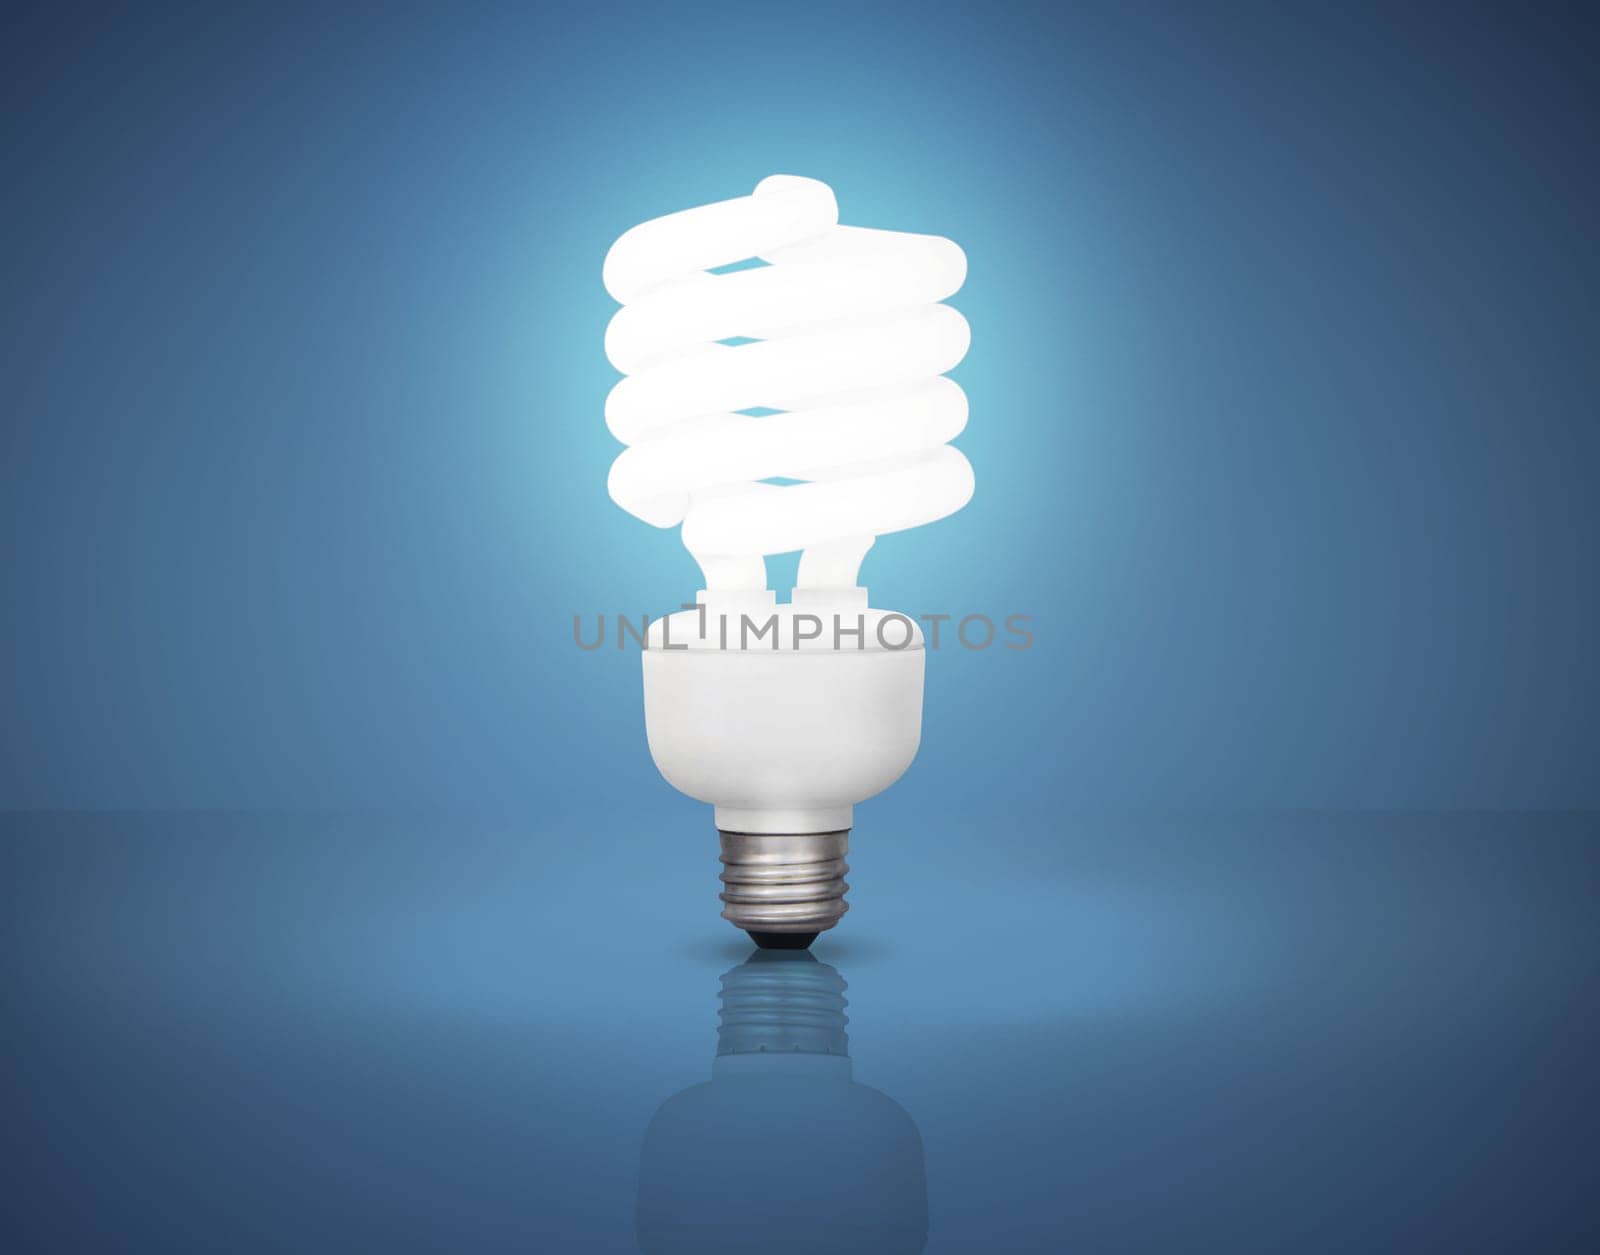 Lightbulb, power and electricity in studio for idea with mockup space for inspiration, solution or genius thought. Energy, glow light and science for knowledge or creative thinking on blue background.